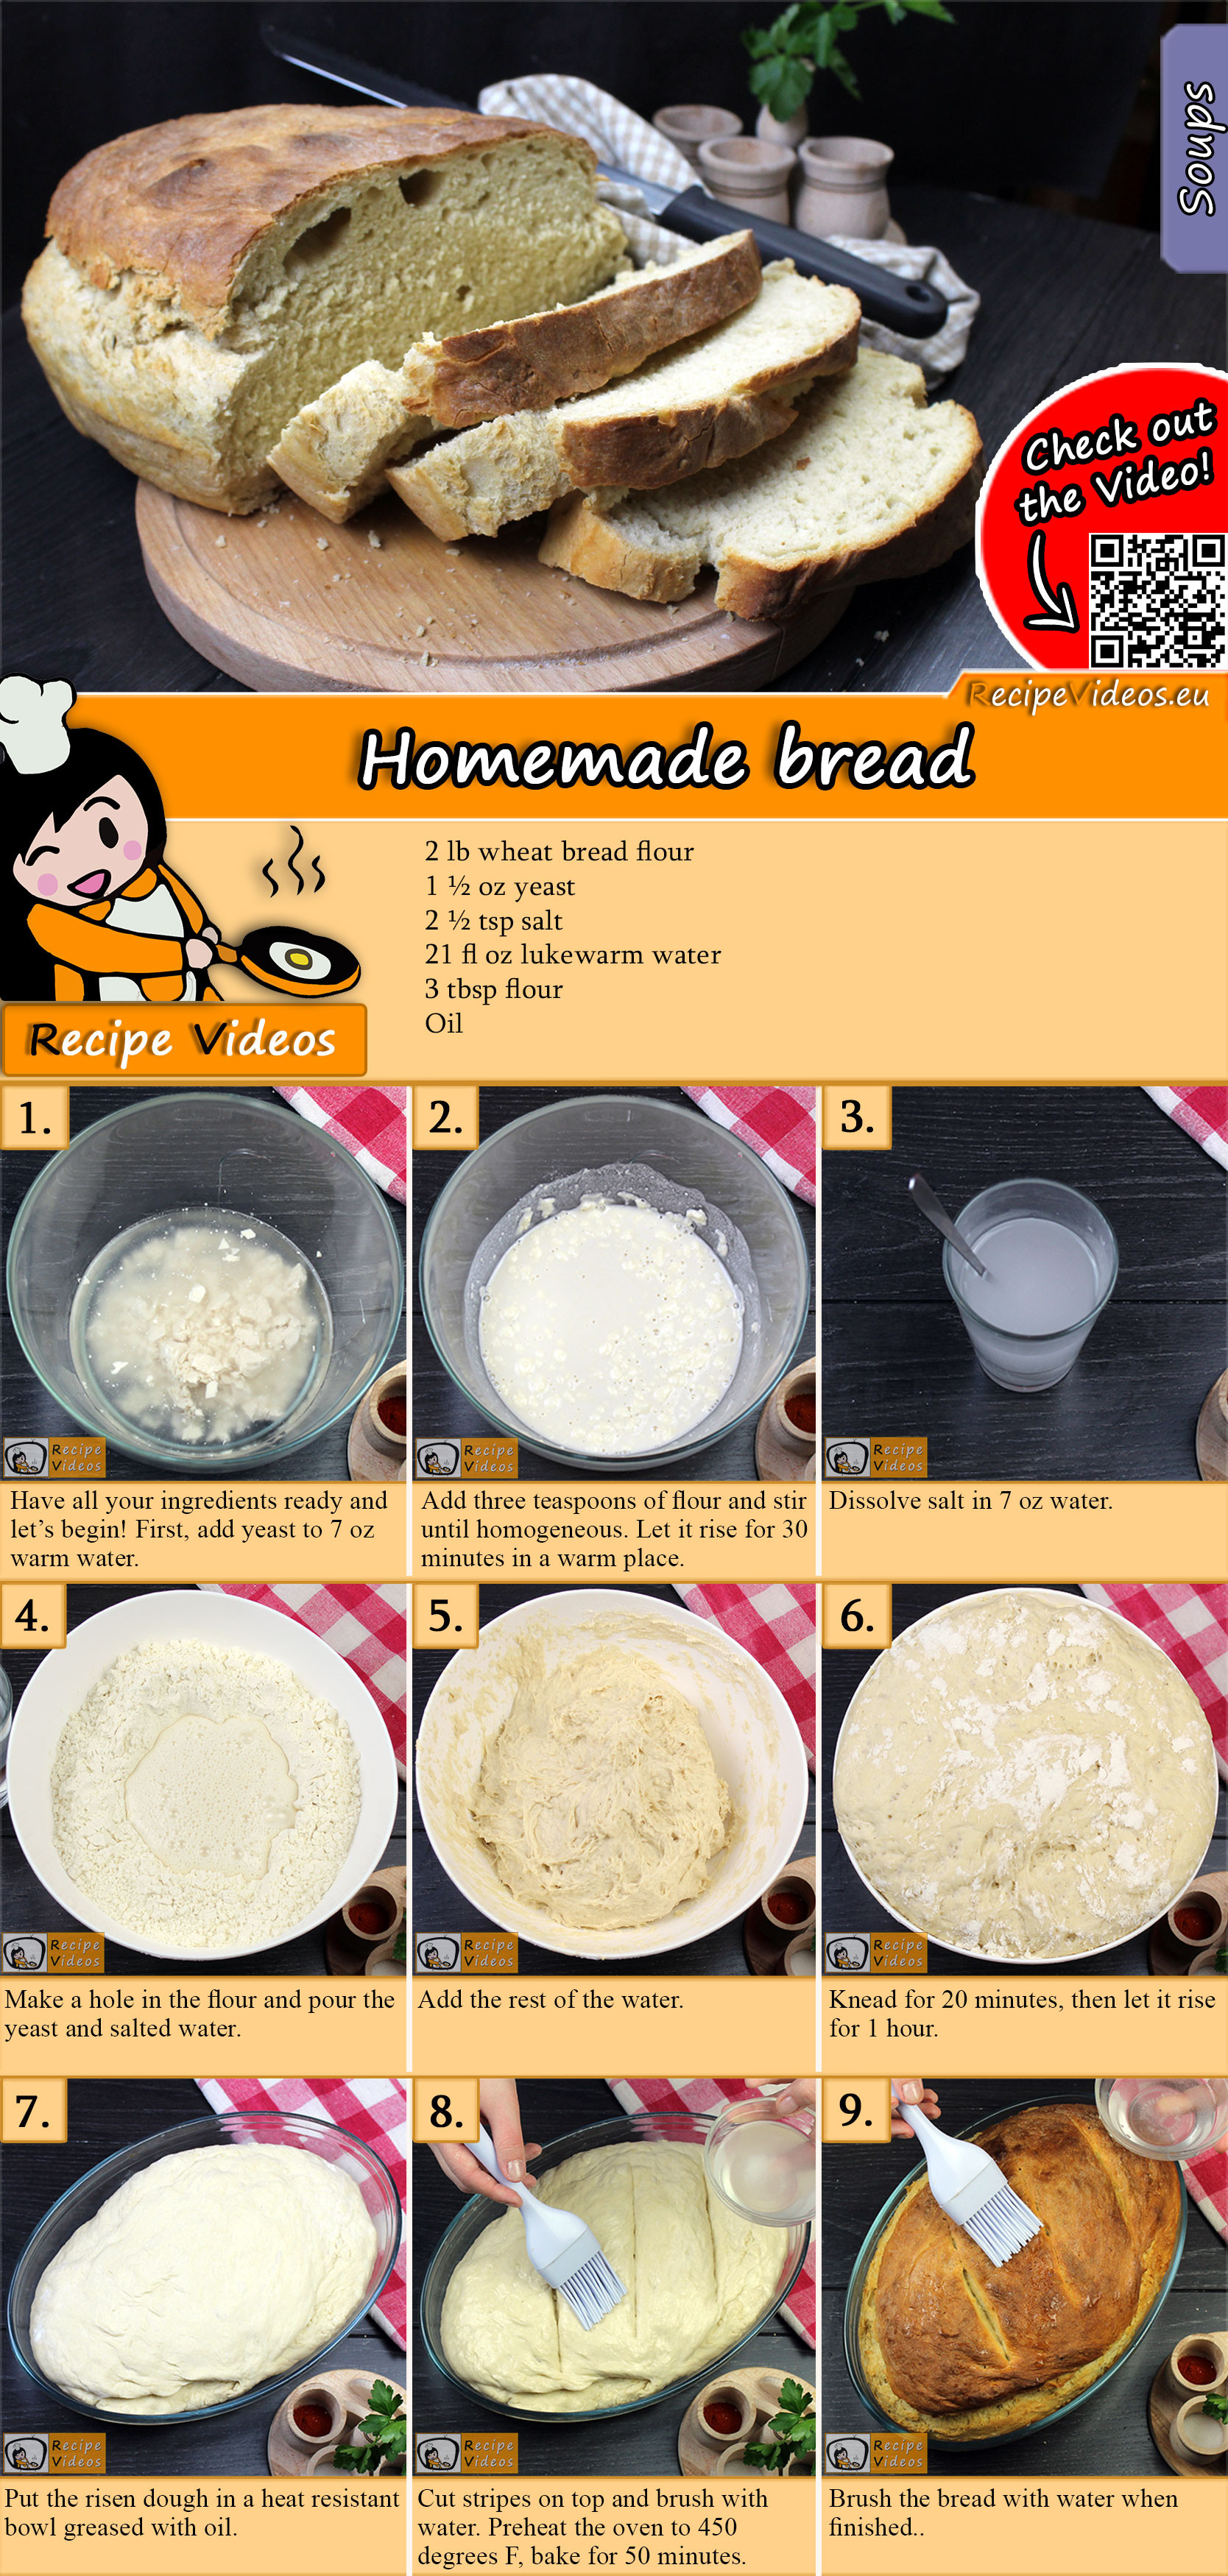 Homemade bread recipe with video